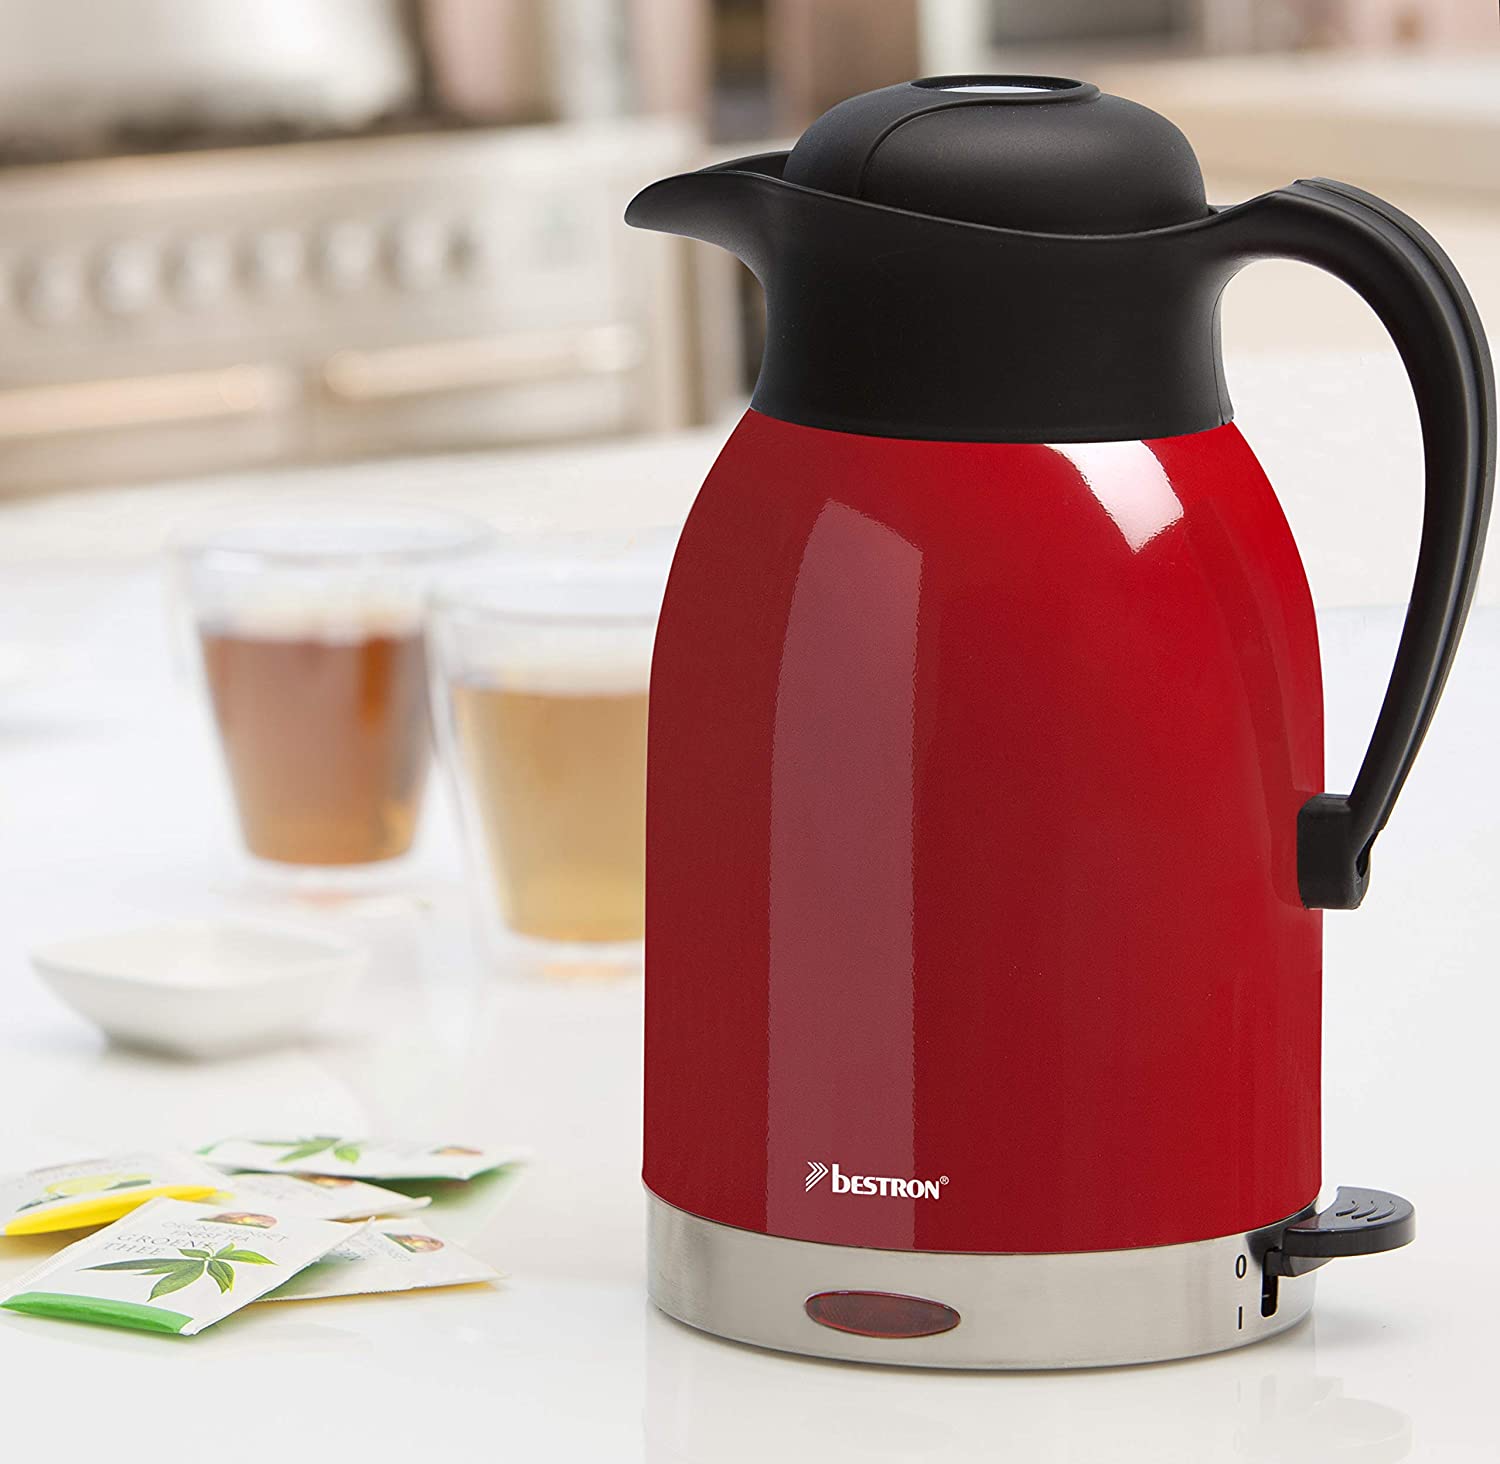 Bestron ATW1600 Thermal Electric Kettle, Cordless, 1600 W, Concealed Heating, Red/Stainless Steel